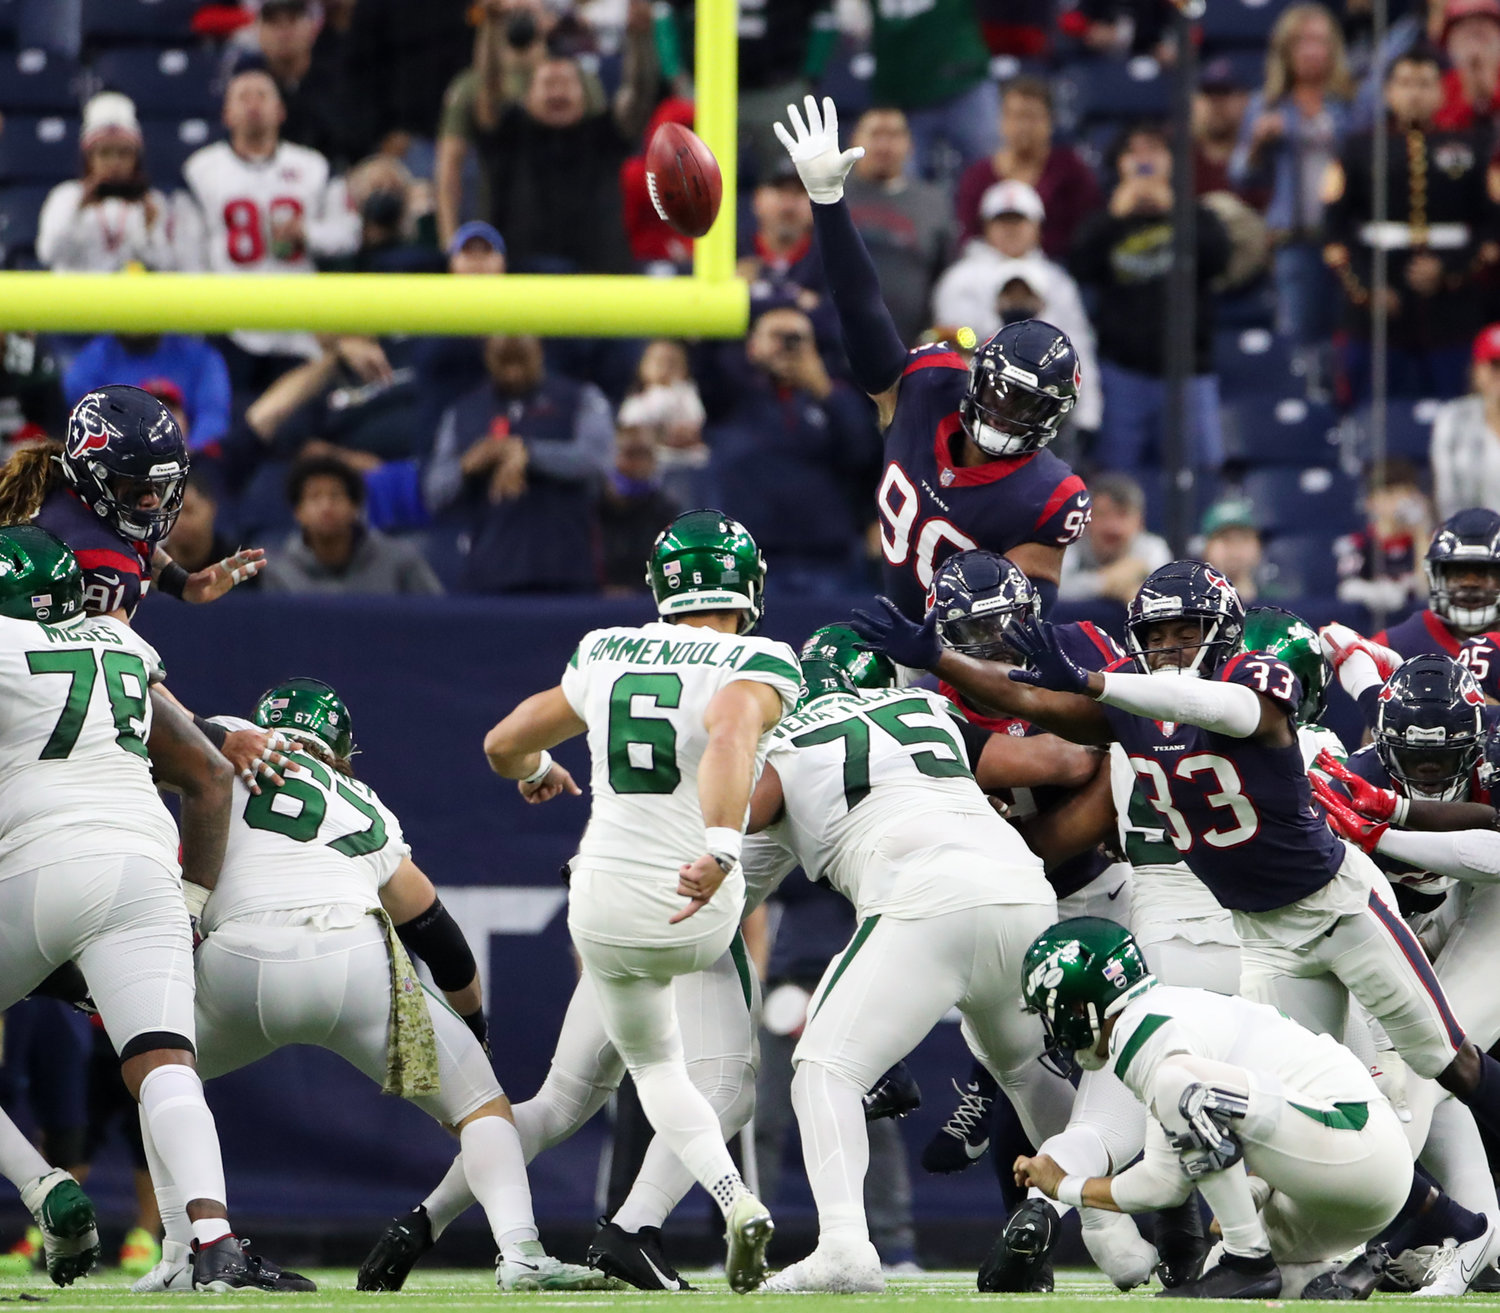 Houston Texans defensive tackle Ross Blacklock (90) leaps in an attempt to block New York Jets place kicker Matt Ammendola’s (6) successful 37-yard field goal during an NFL game between the Houston Texans and the New York Jets on November 28, 2021 in Houston, Texas. The Jets won, 21-14